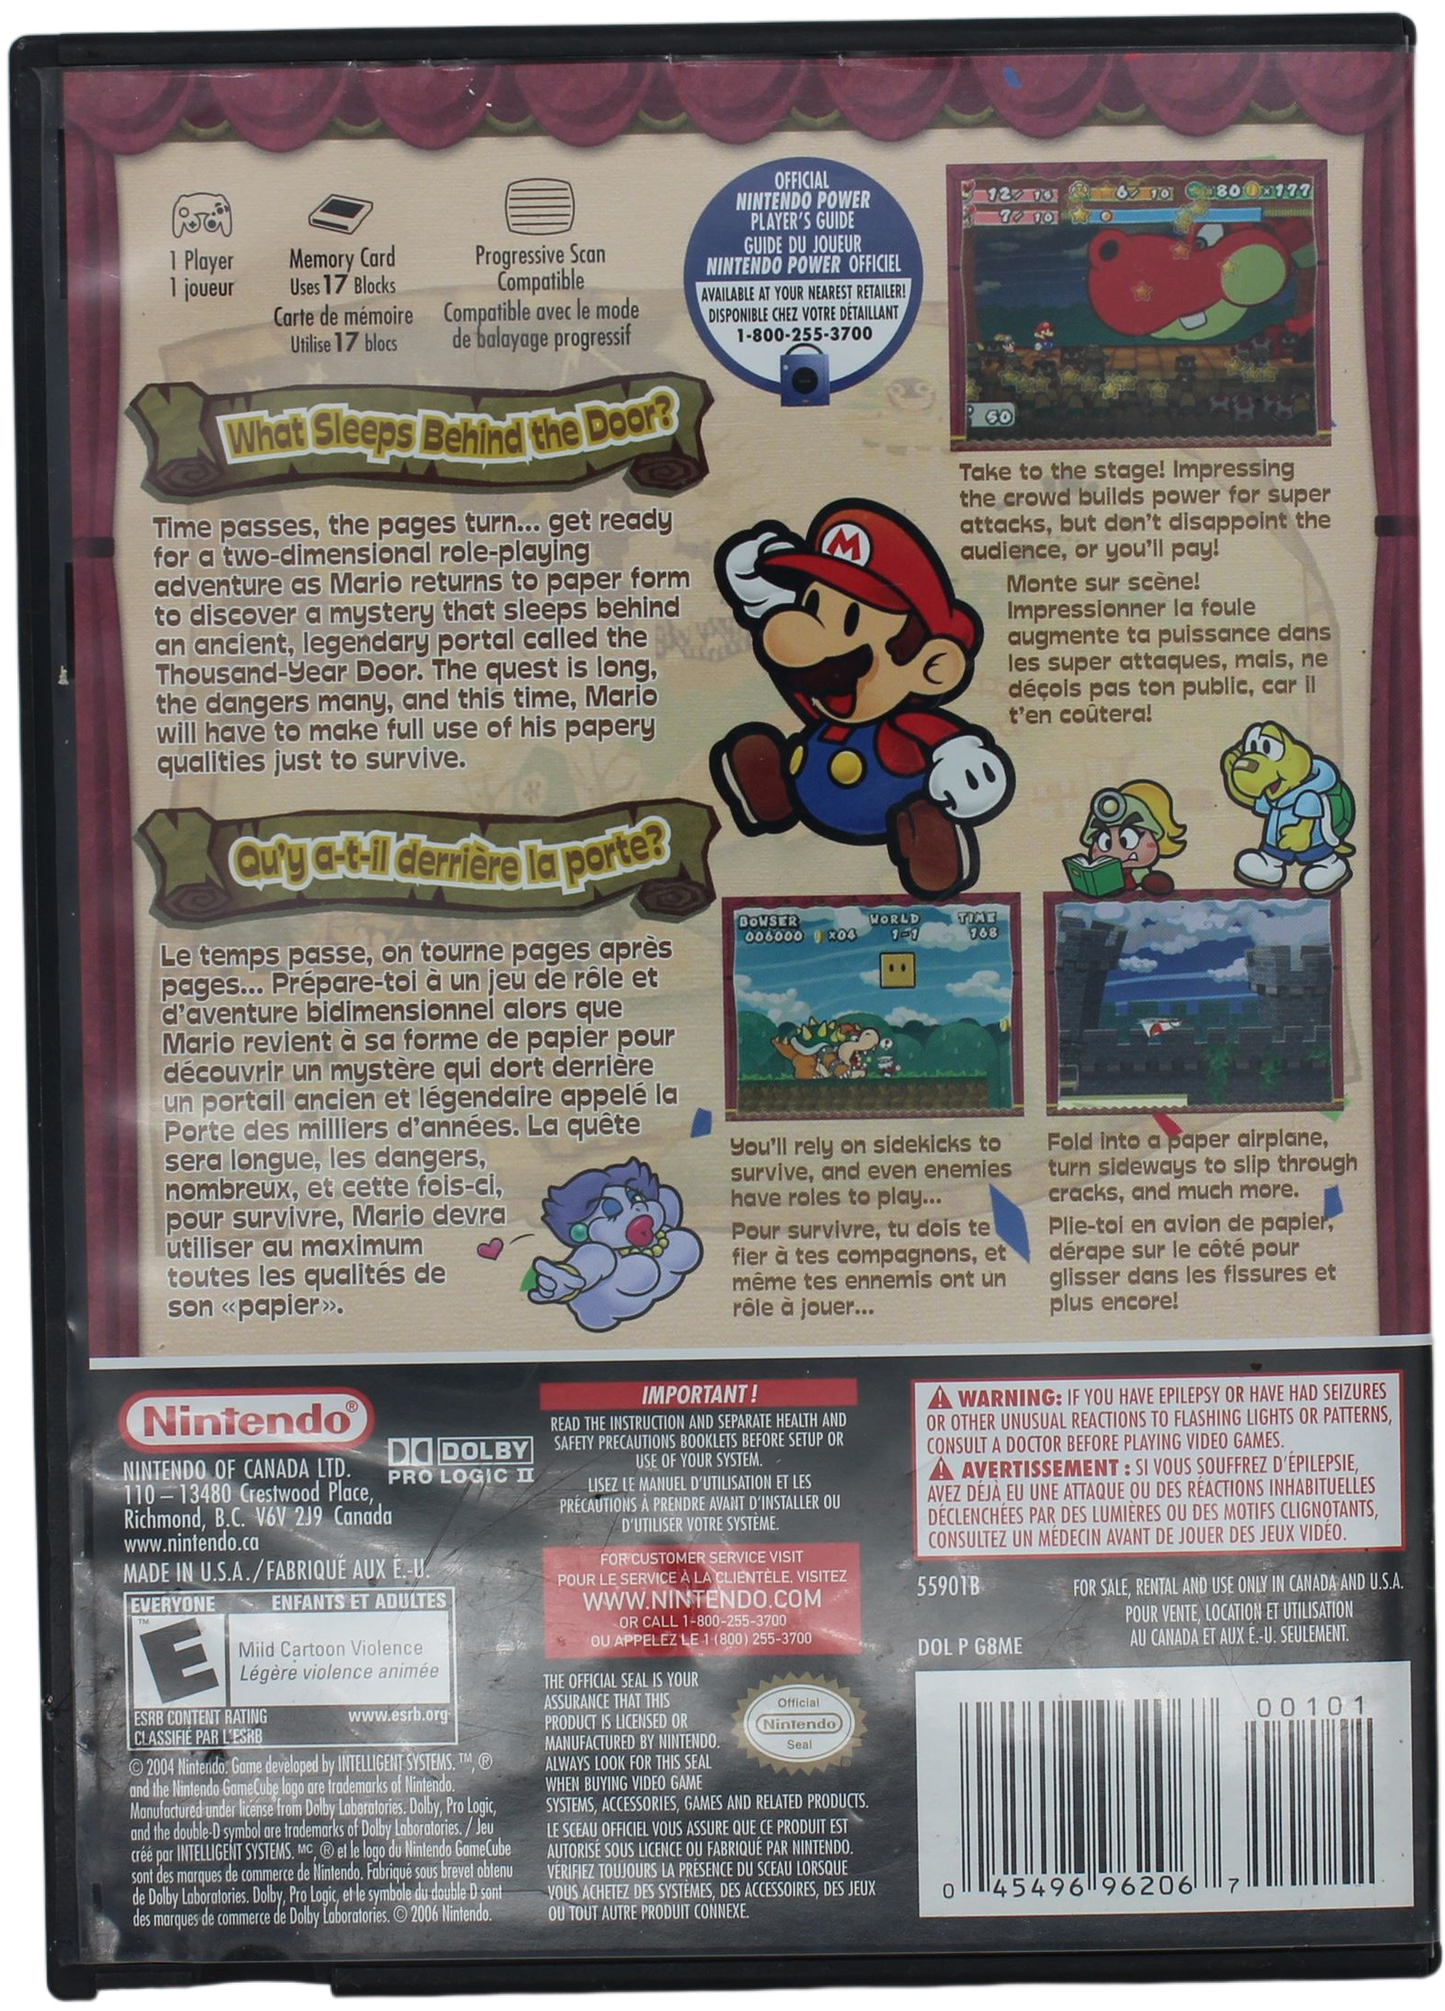 Paper Mario: The Thousand Year Door [Player's Choice | Best Seller]